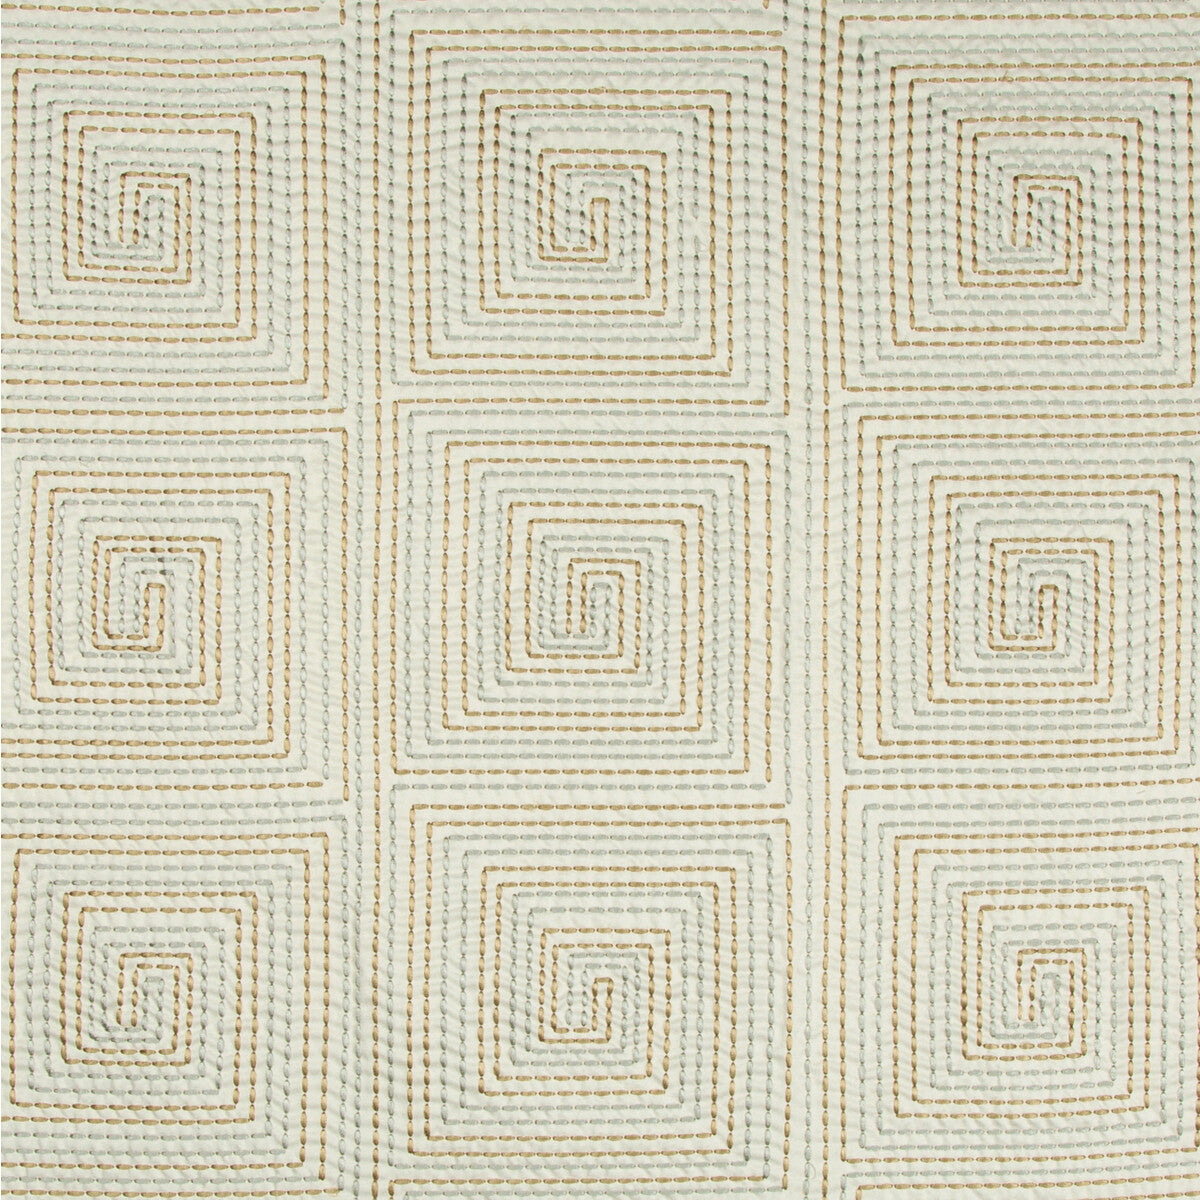 Edge Stitch fabric in bronze color - pattern 4453.616.0 - by Kravet Couture in the Modern Tailor collection